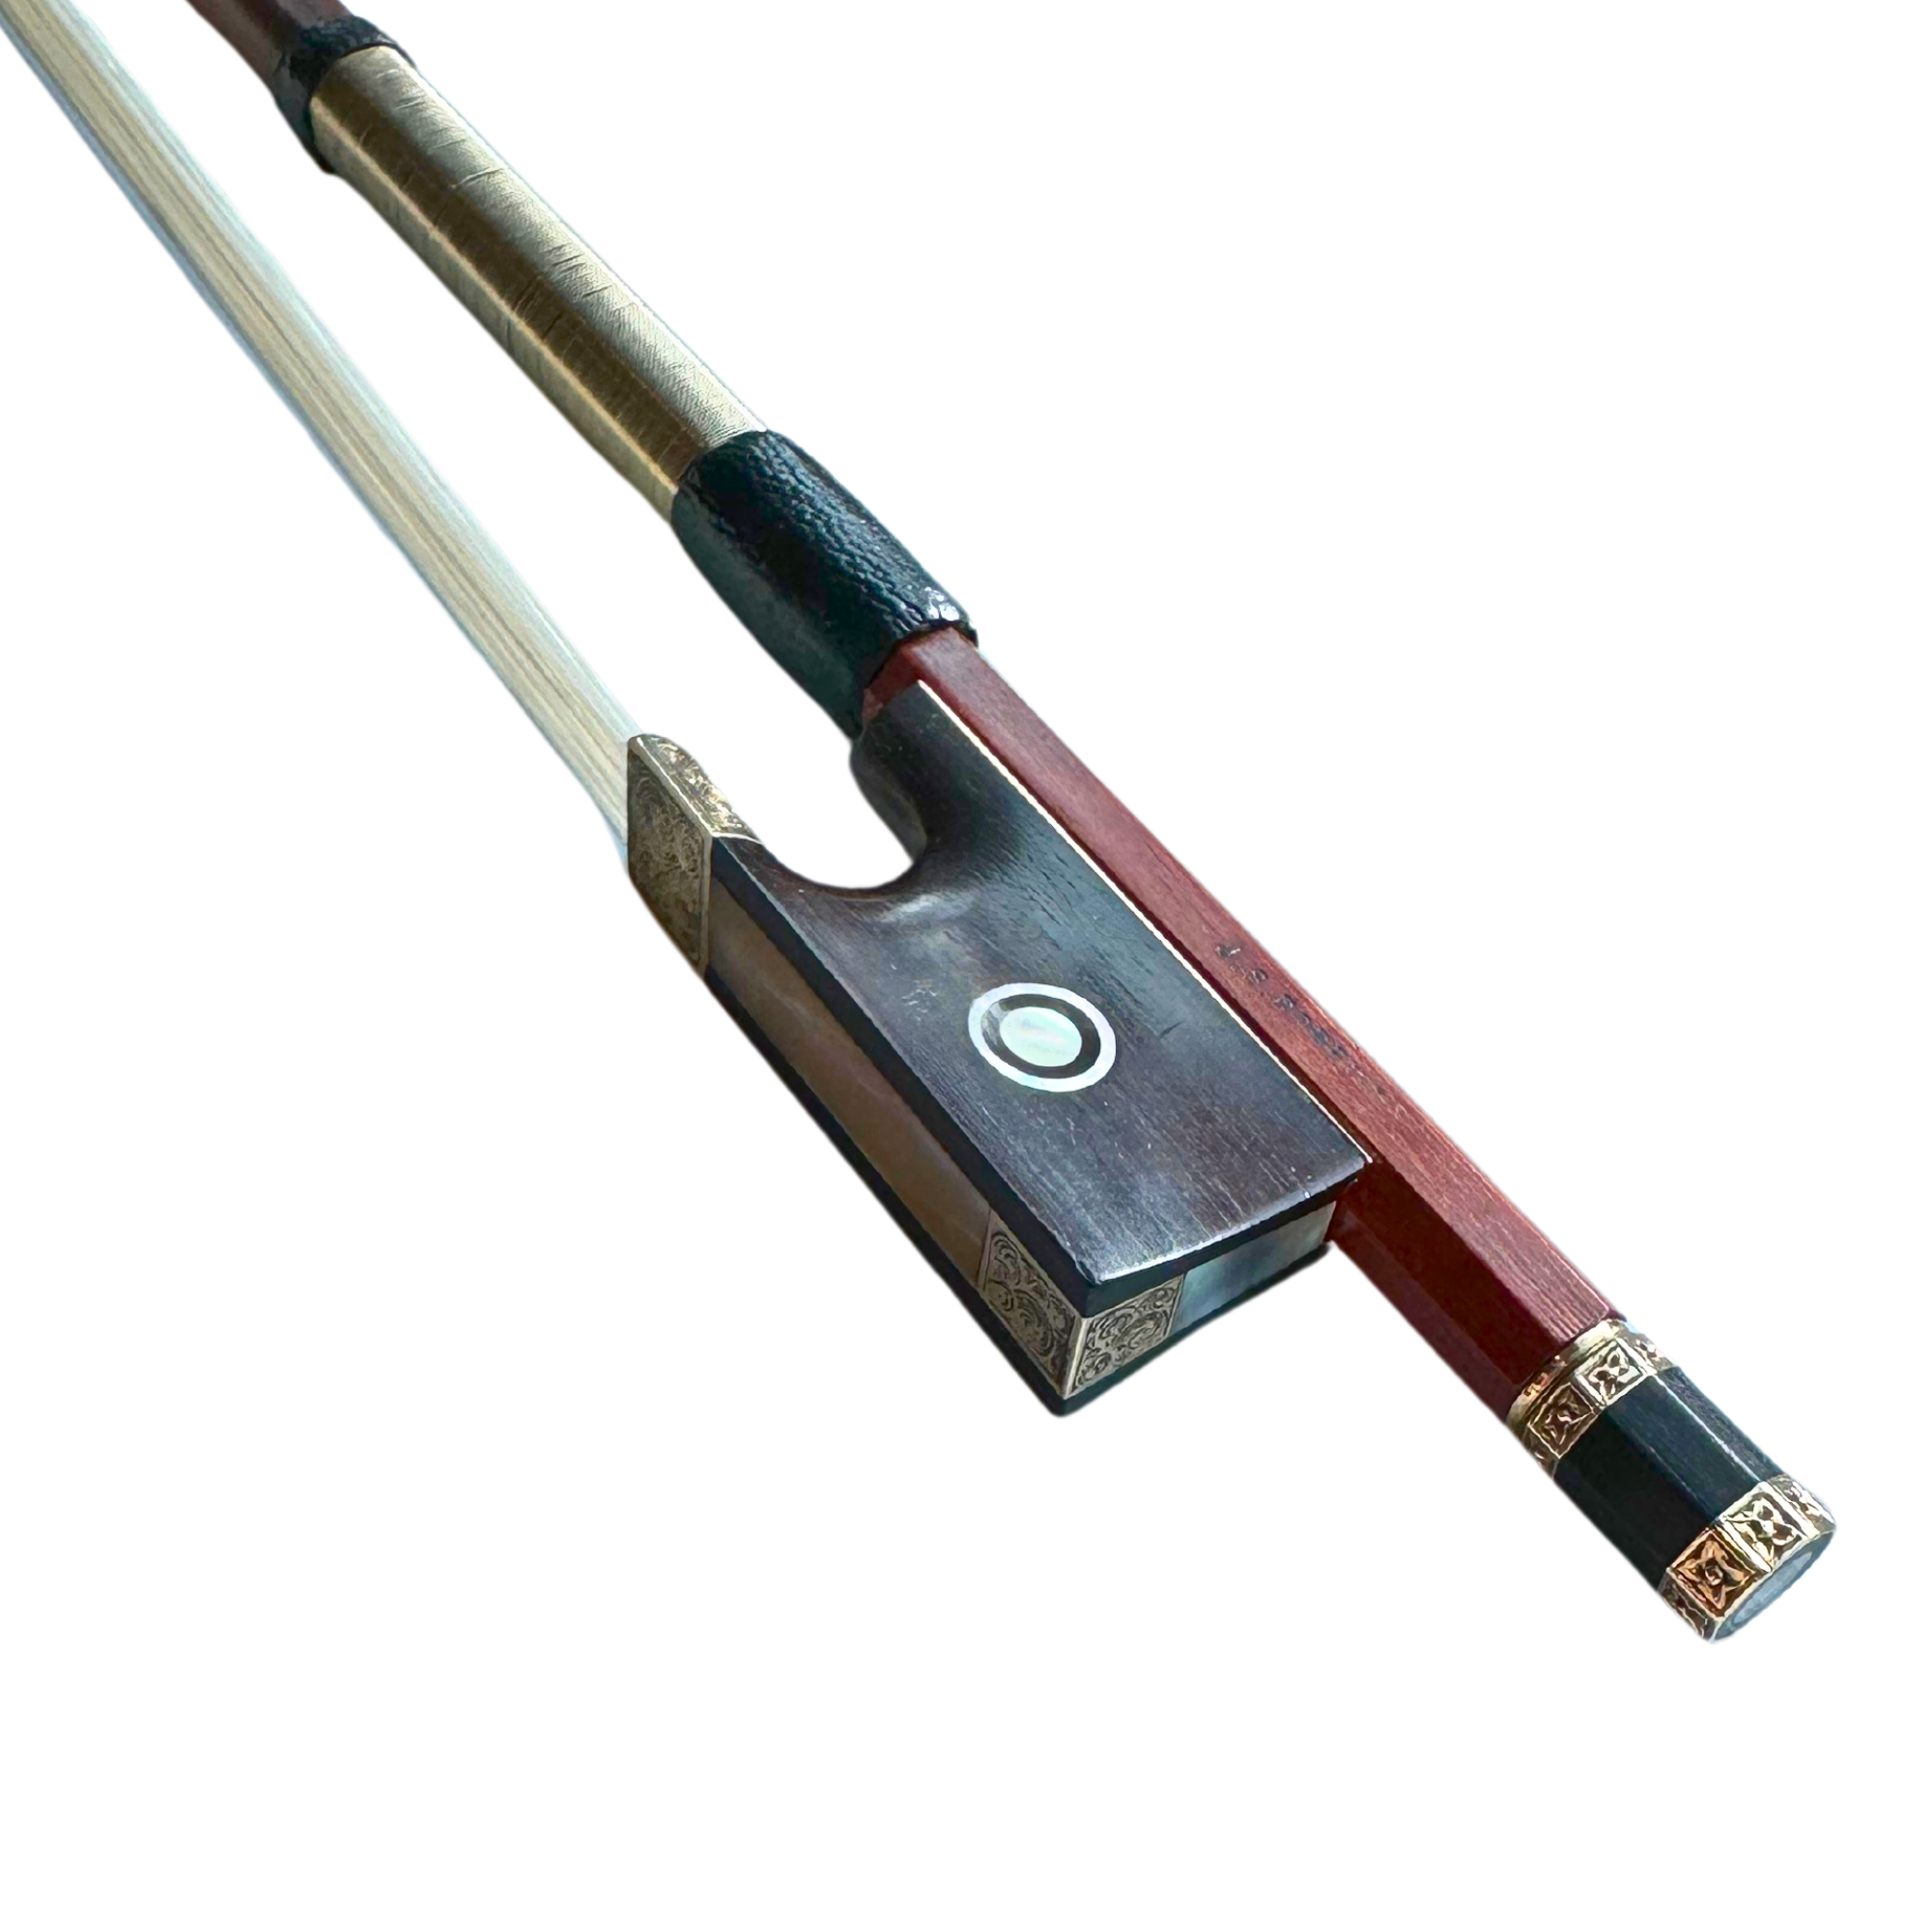 James Morris Robert Gold-Mounted Violin Bow in action